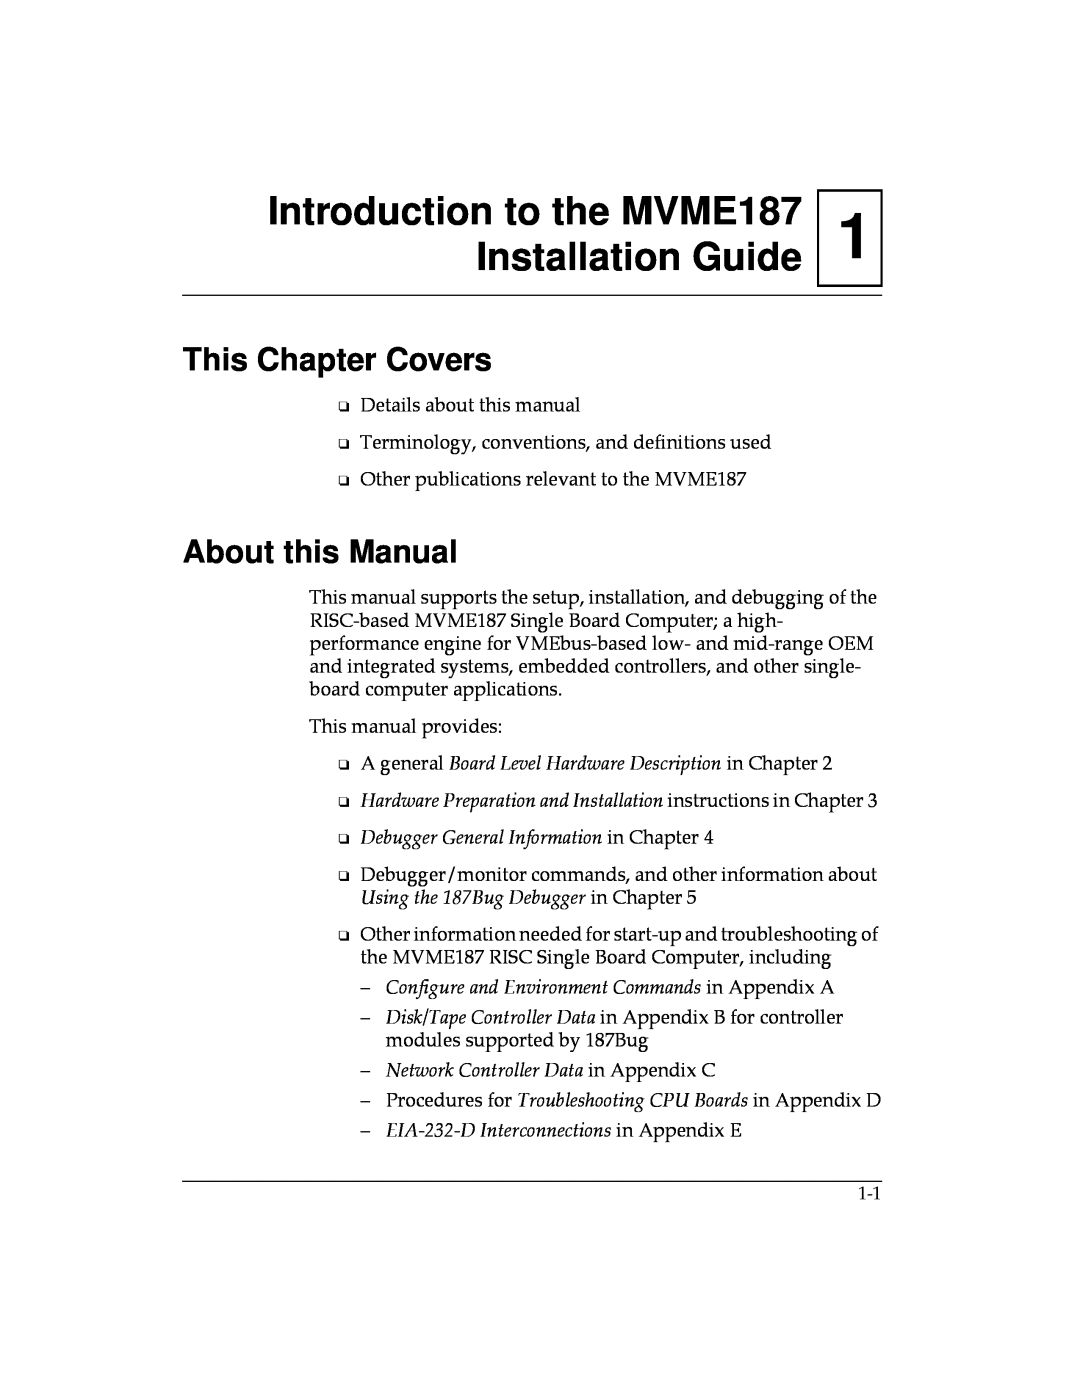 Motorola manual 1Introduction to the MVME187 Installation Guide, This Chapter Covers, About this Manual 